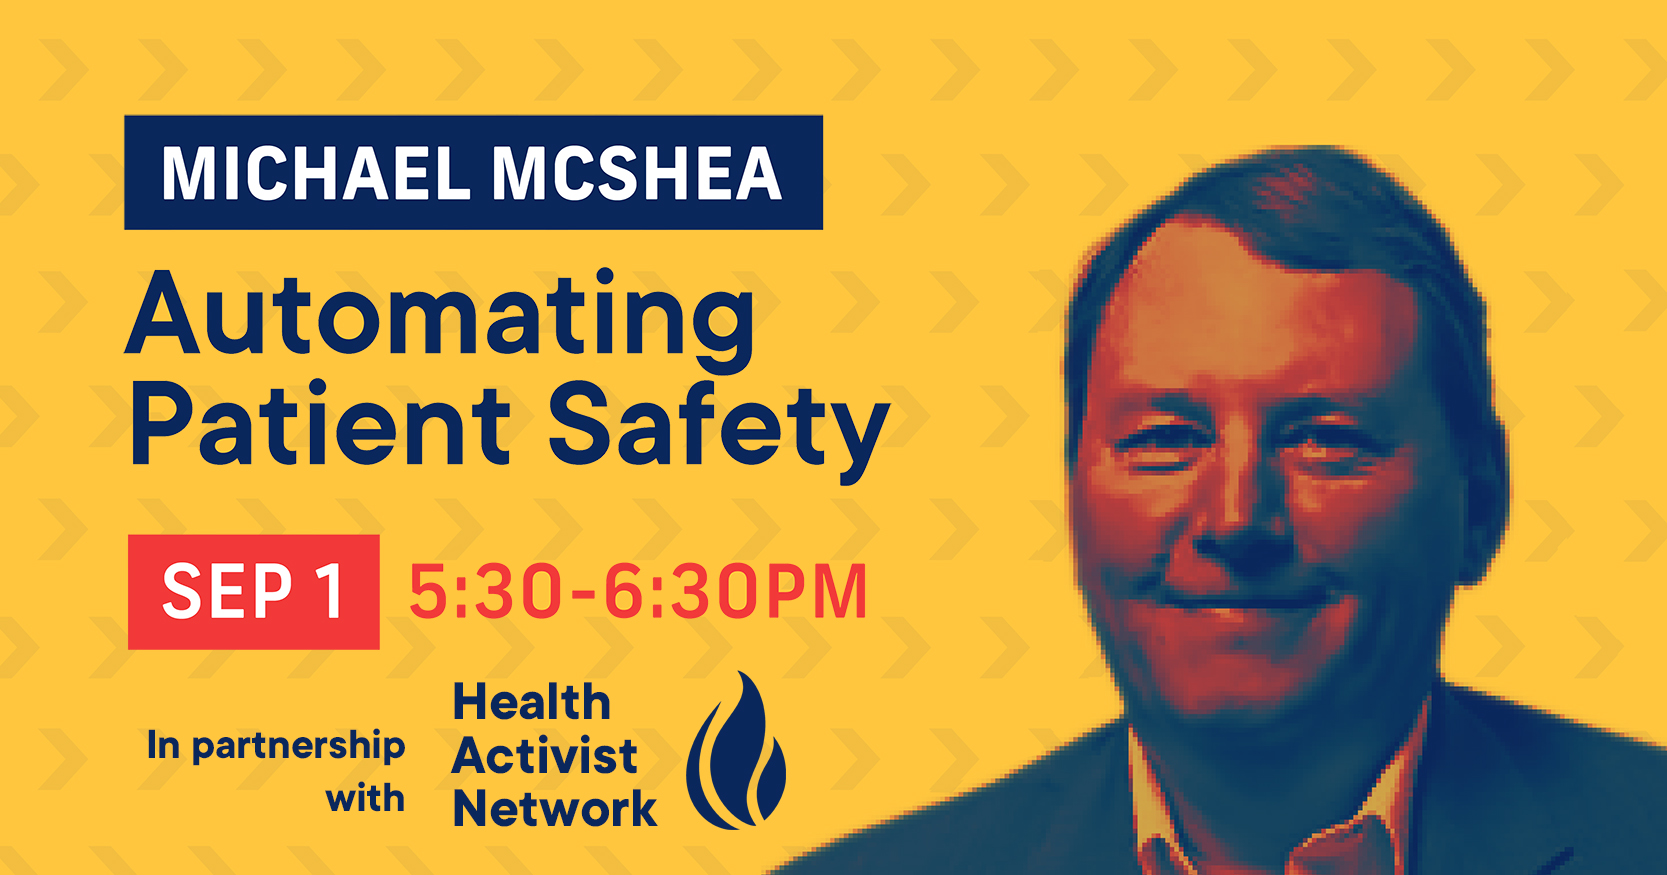 Automating Patient Safety with Michael McShea on Sept 1 Image